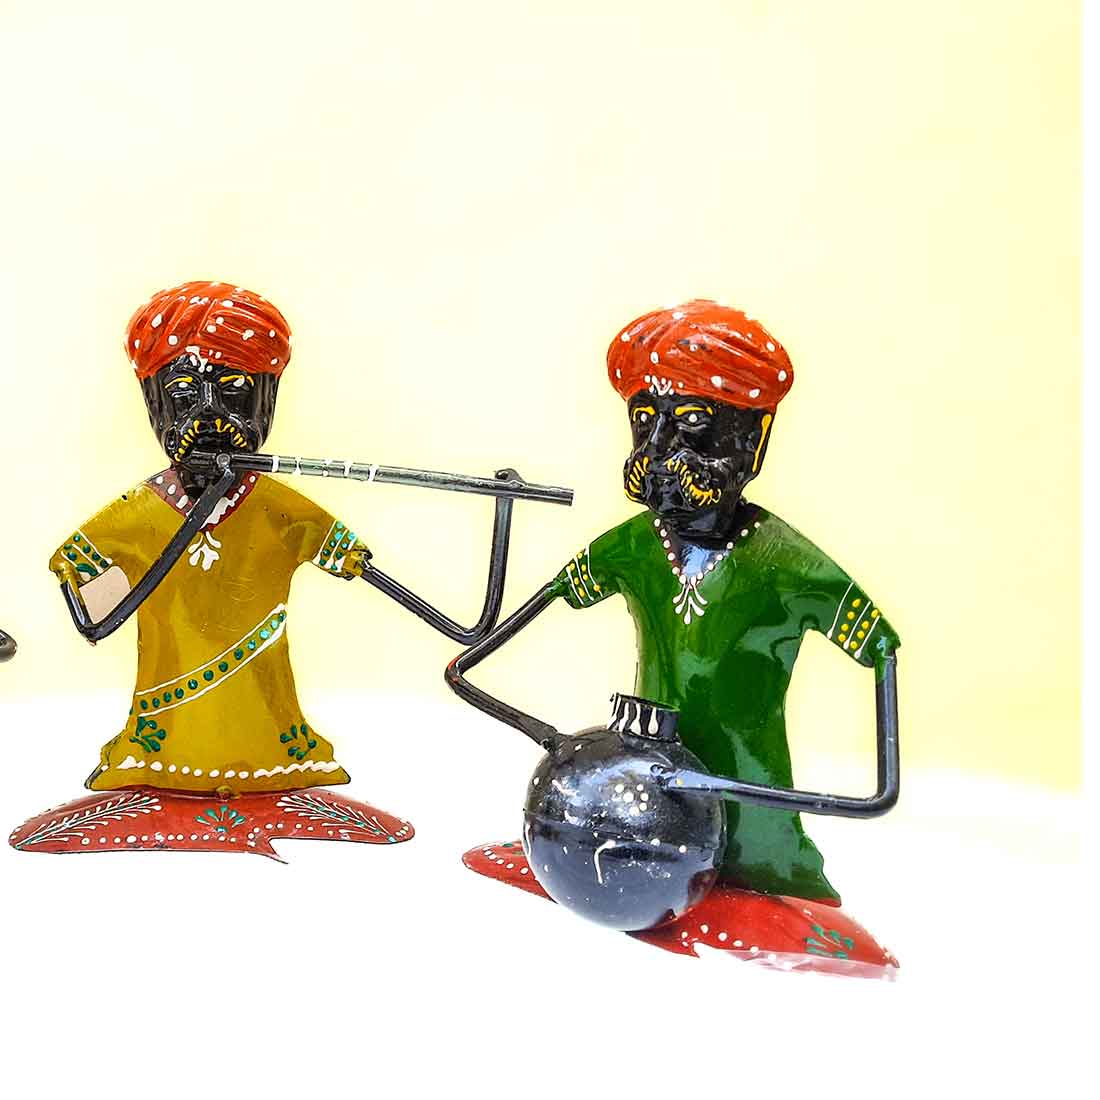 Rajasthani Musicians Figurines | Decorative Showpiece - for Home, Bedroom, Living Room, Office Desk & Table | Gifts For Wedding, Housewarming & Festivals - 7 Inch - Apkamart #Style_Pack of 3